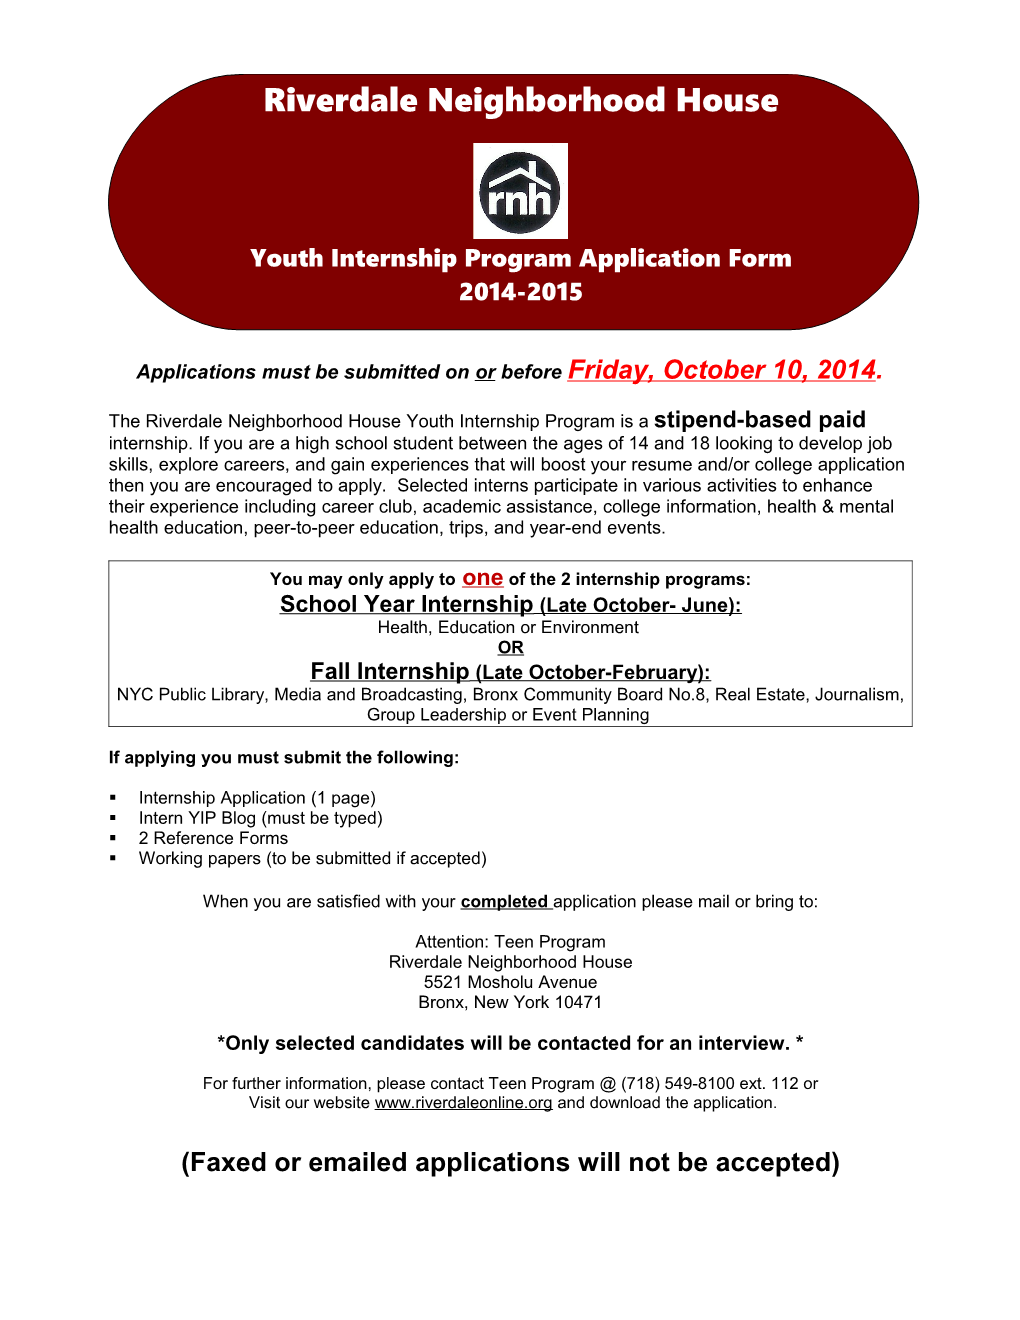 Applications Must Be Submitted on Or Before Friday, October 10, 2014